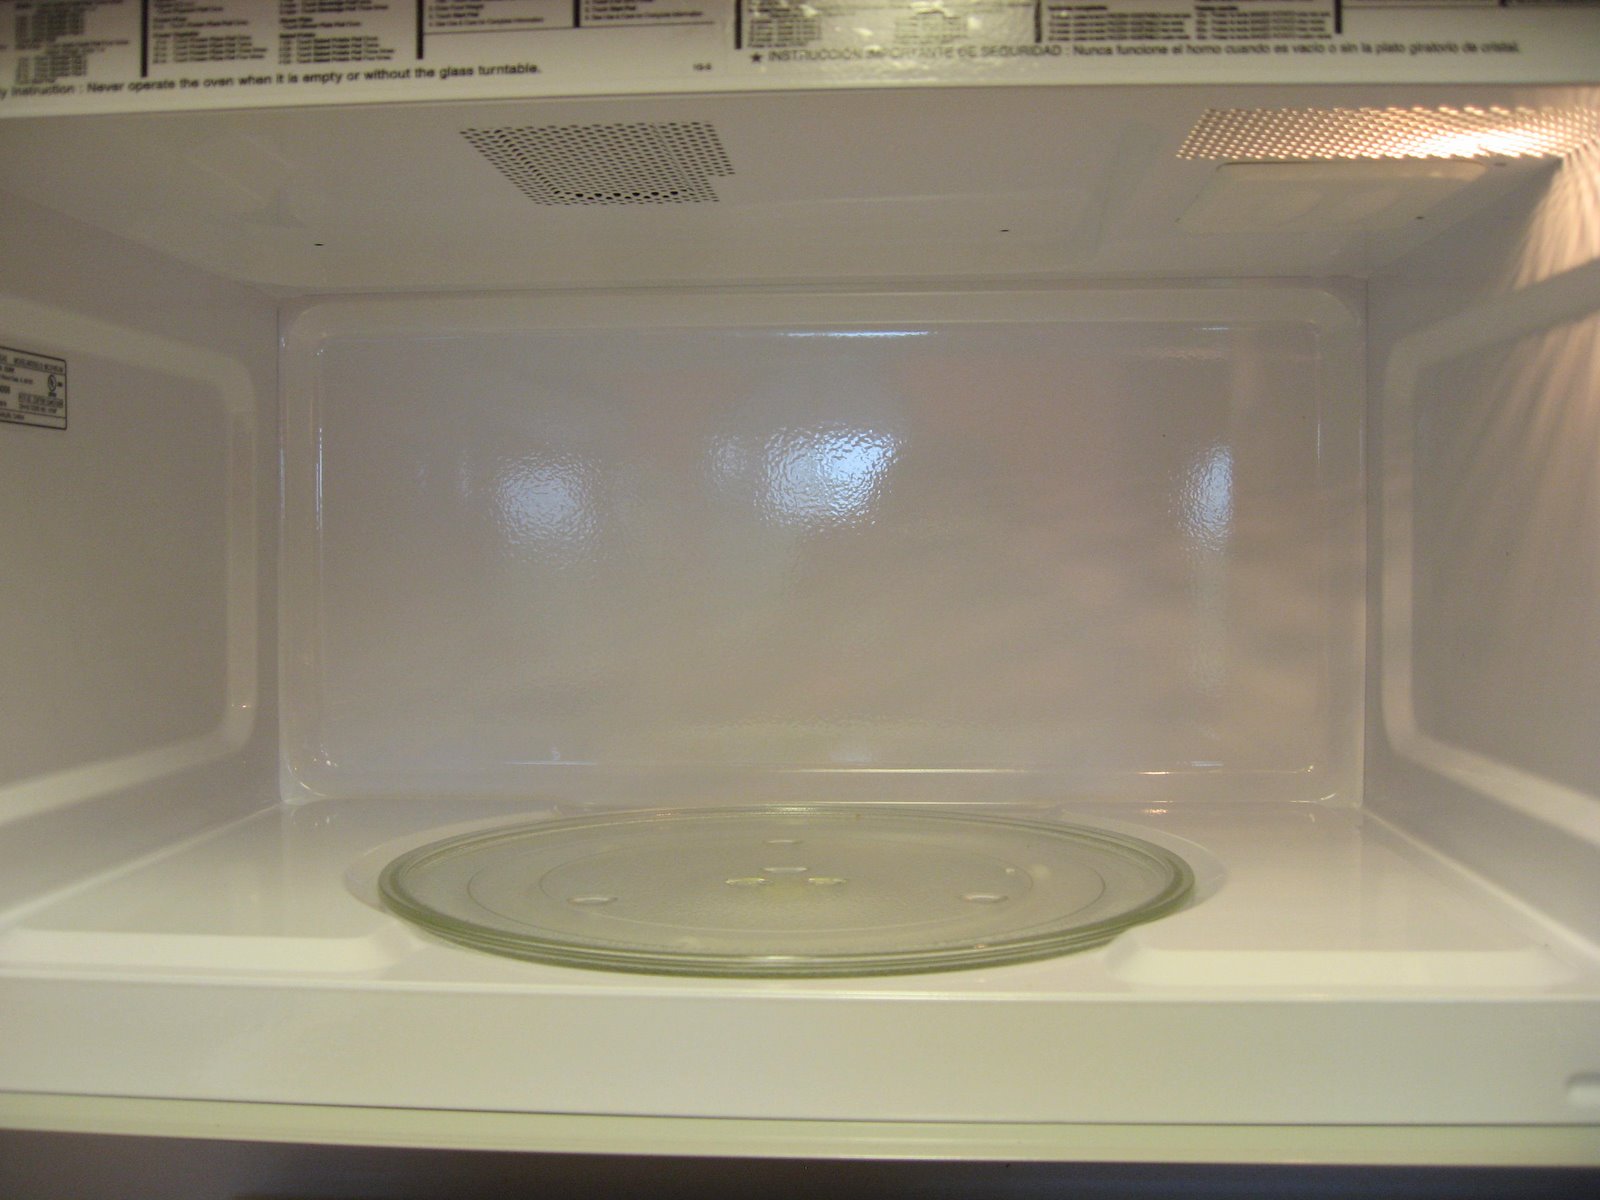 Cleaning a Microwave